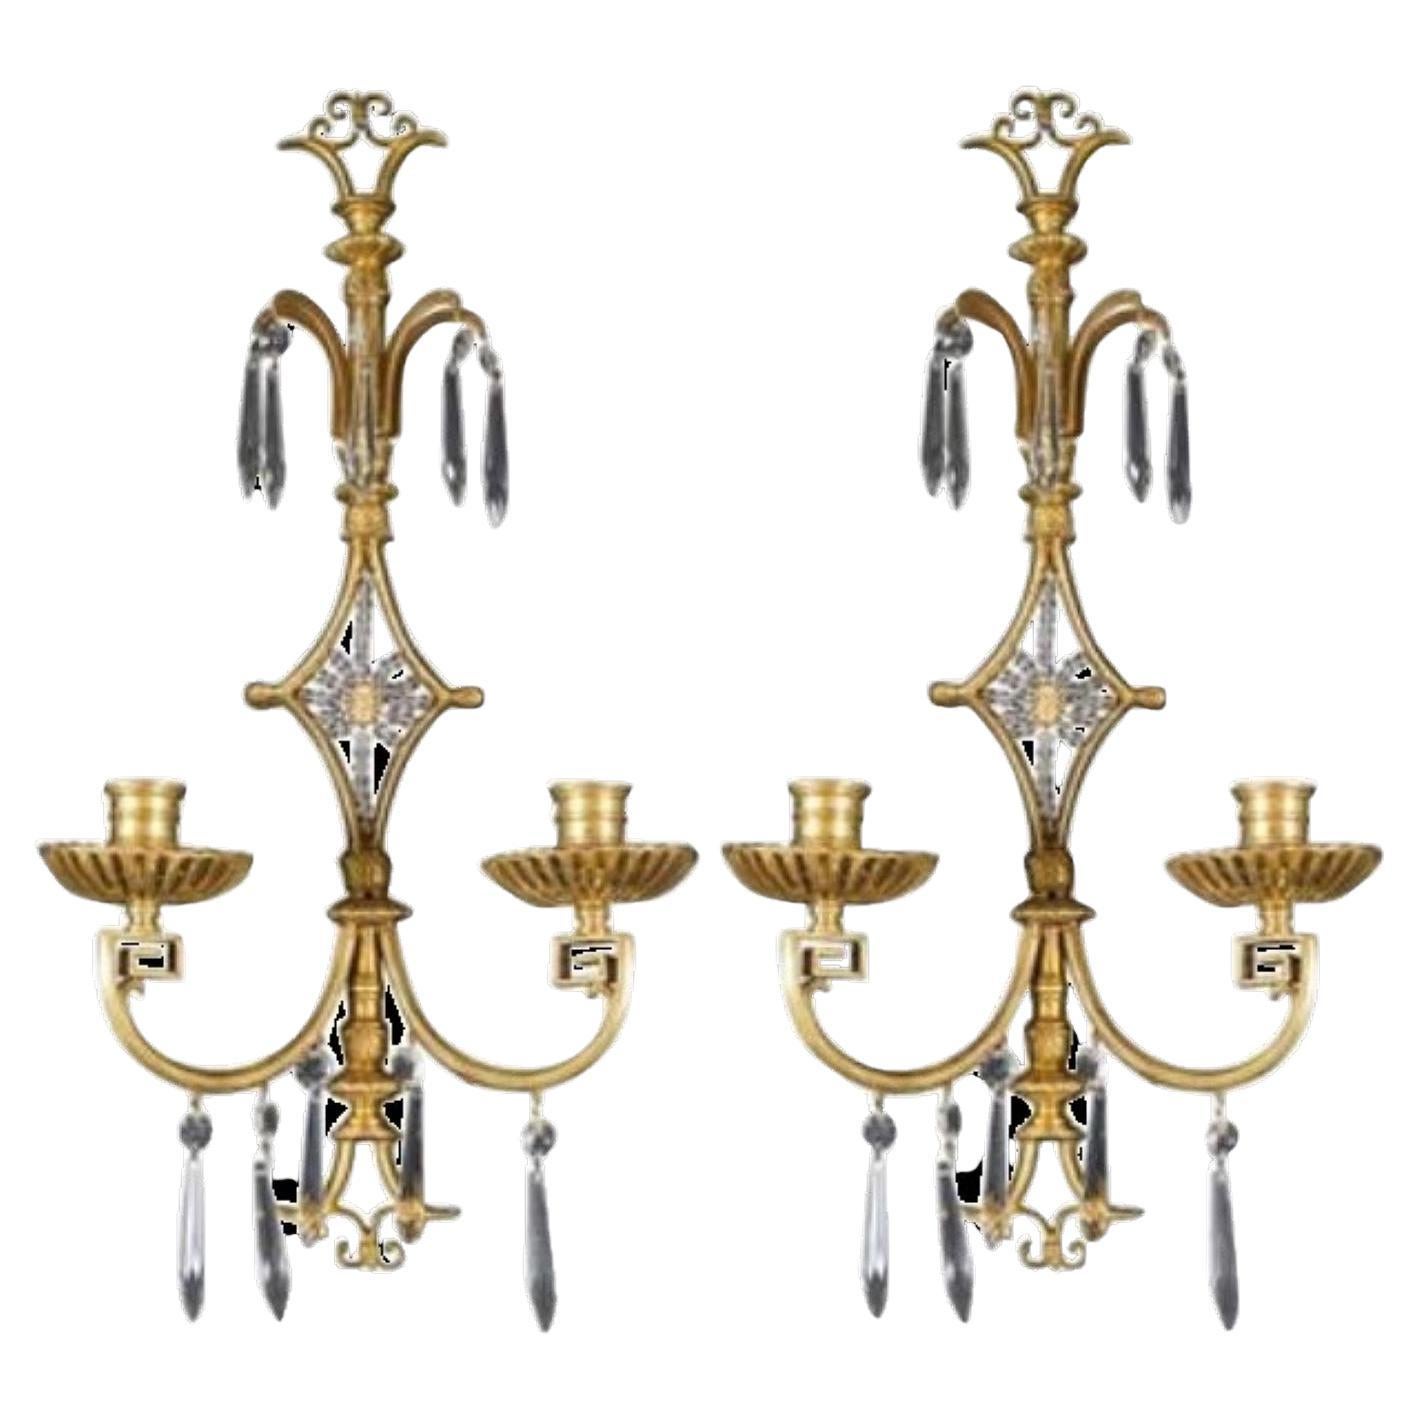 1920's Caldwell Gilt Bronze Sconces with Crystals 